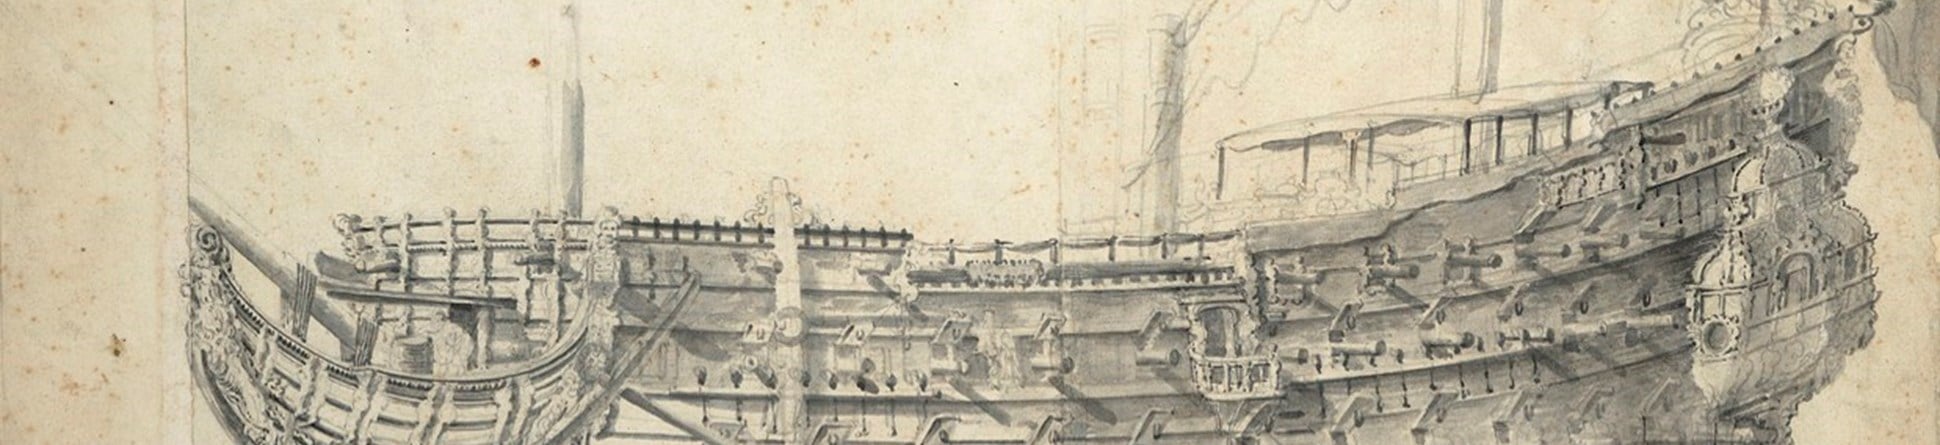 Pencil and wash portrait of a warship in broadside view, with a flag flying from the stern at right, and only the lower portions of its masts visible. At top left is a separate drawing of a Union Jack.